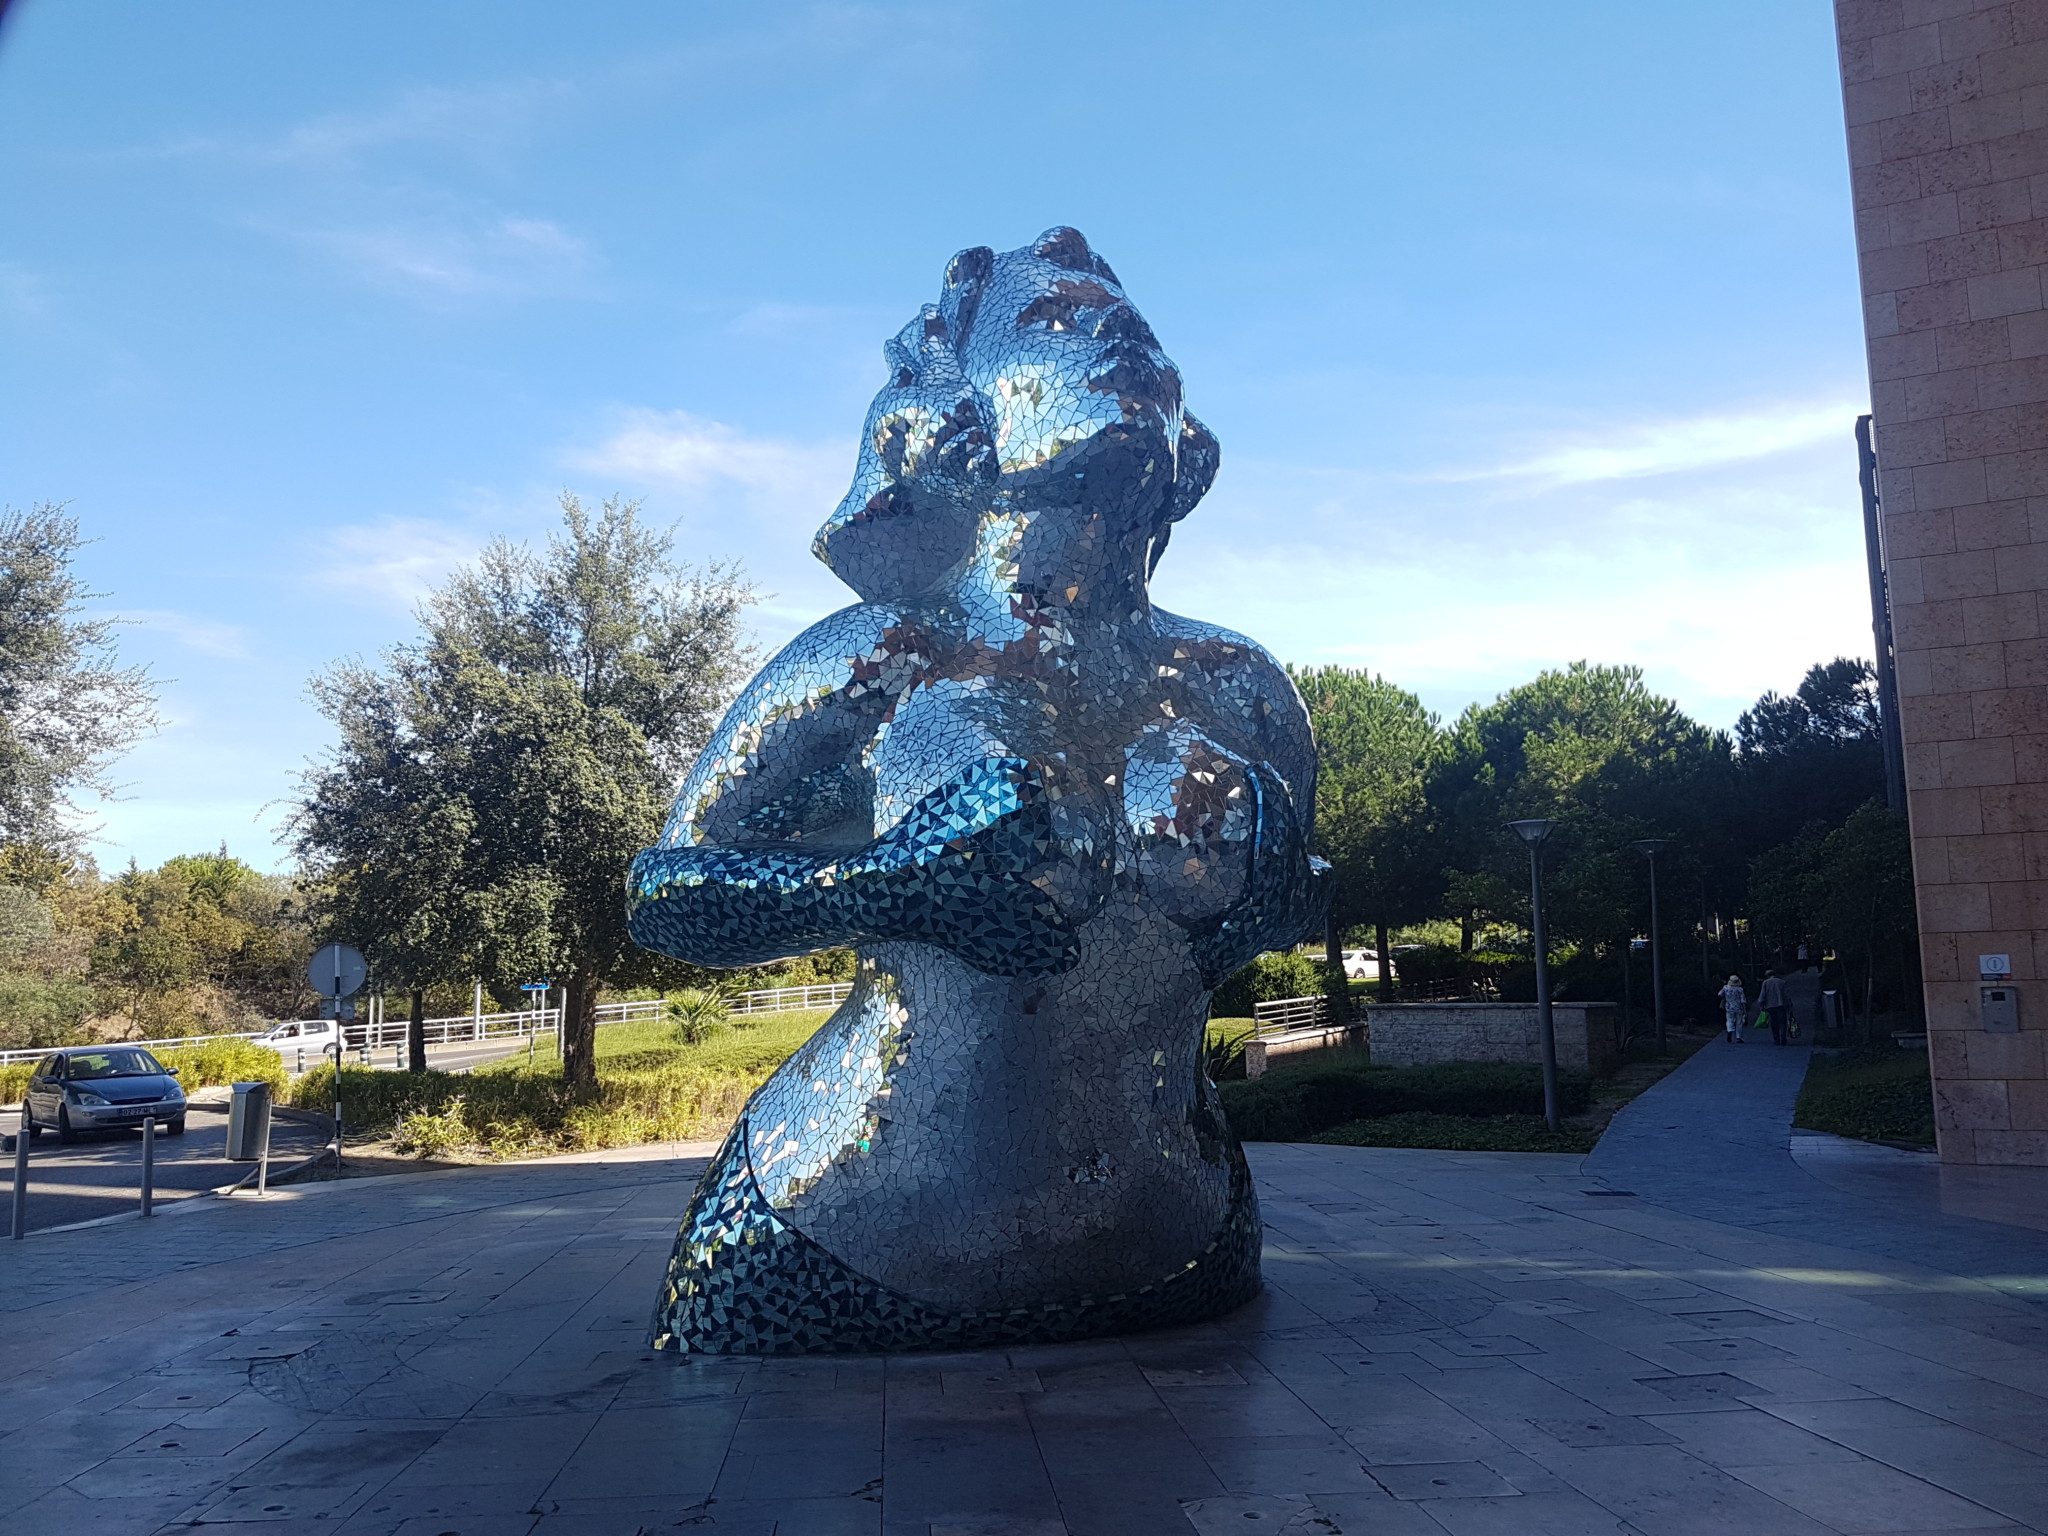 Mermaid Outside the Mall in Lisbon (Very Crowded)